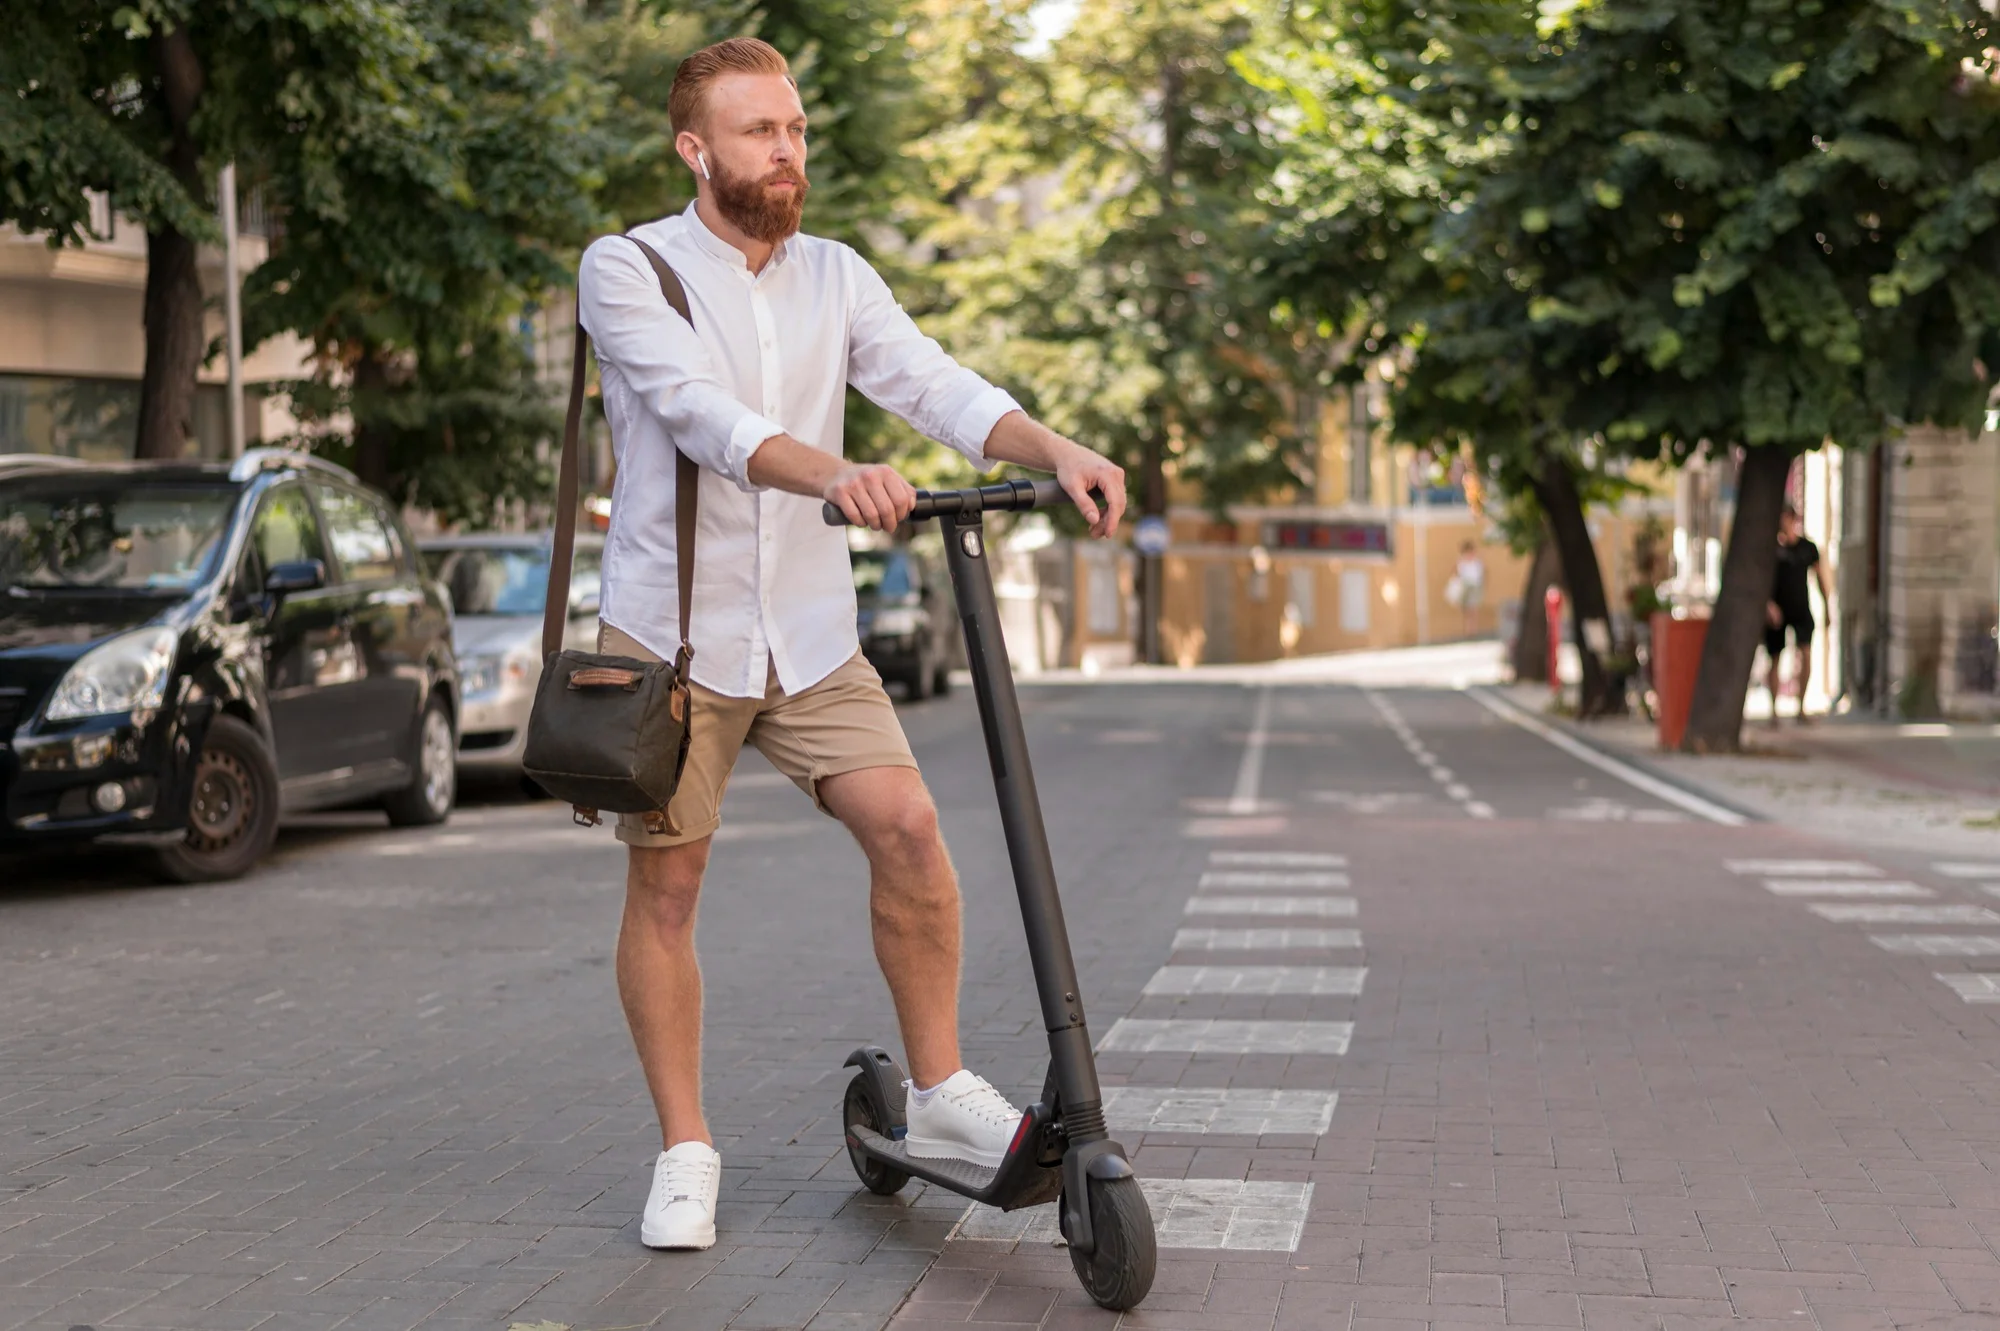 Top 10 Features to Consider When Buying an Electric Scooter